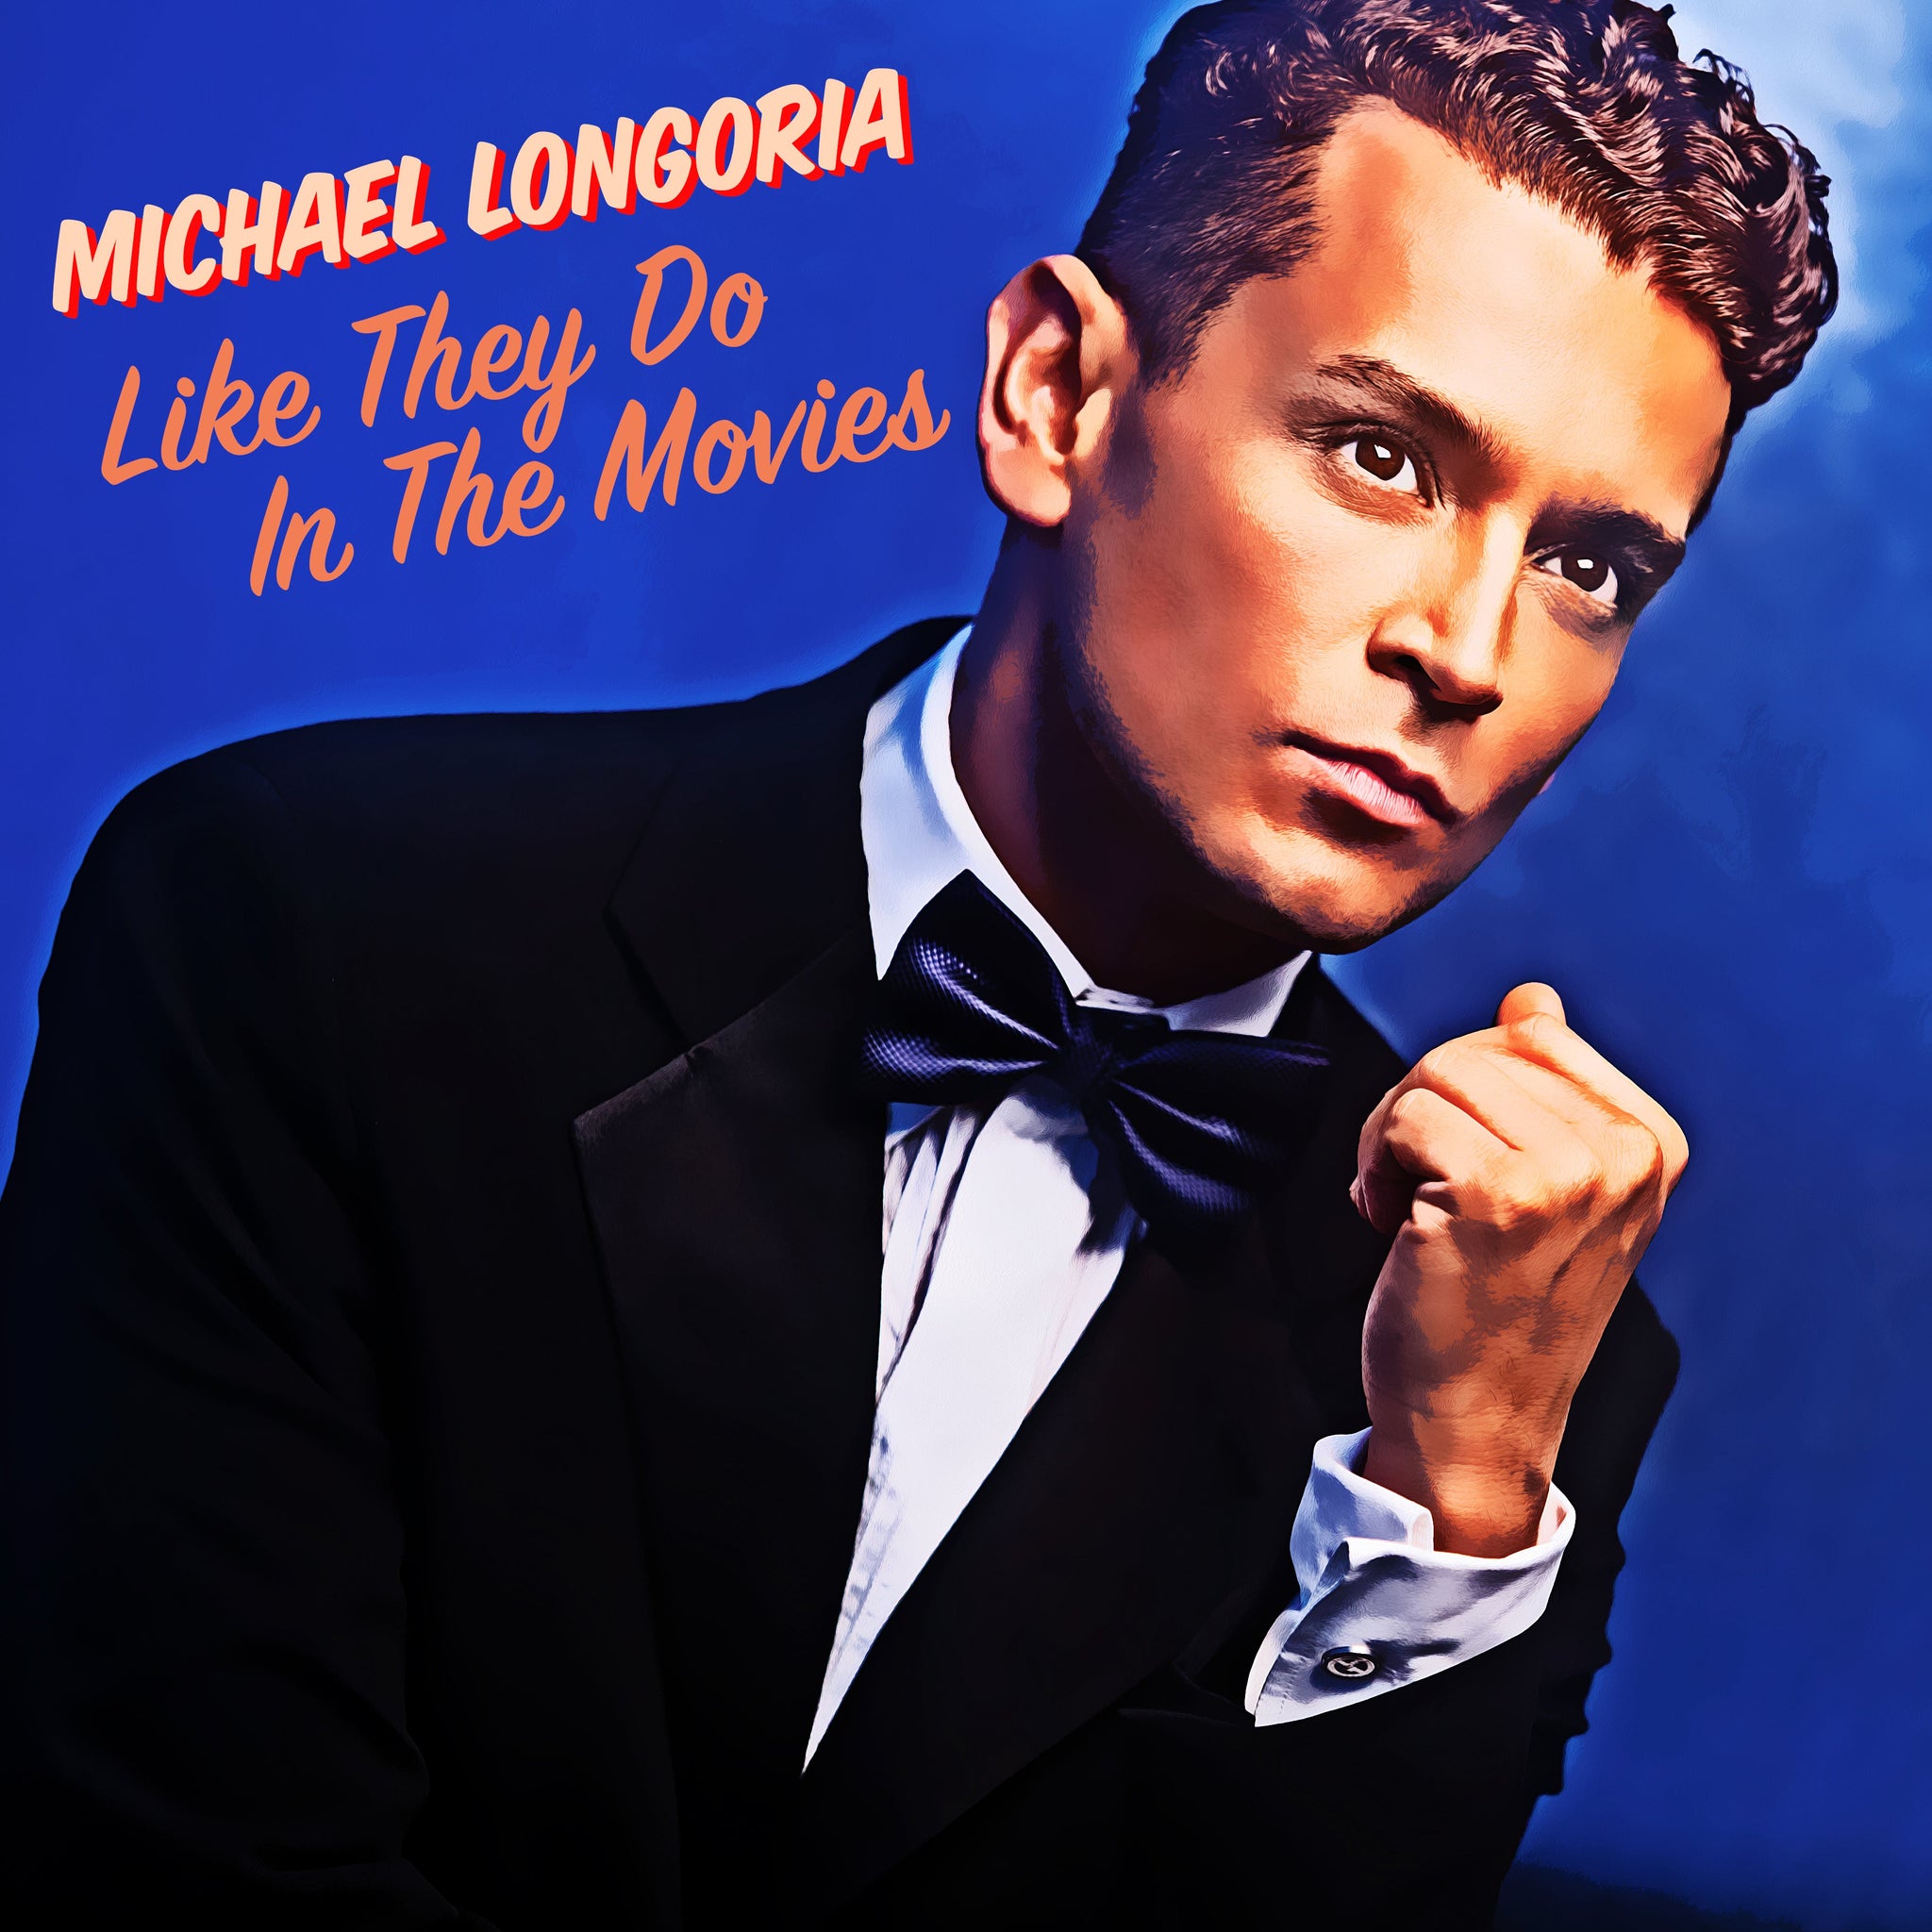 Michael Longoria: Like They Do In The Movies [MP3]